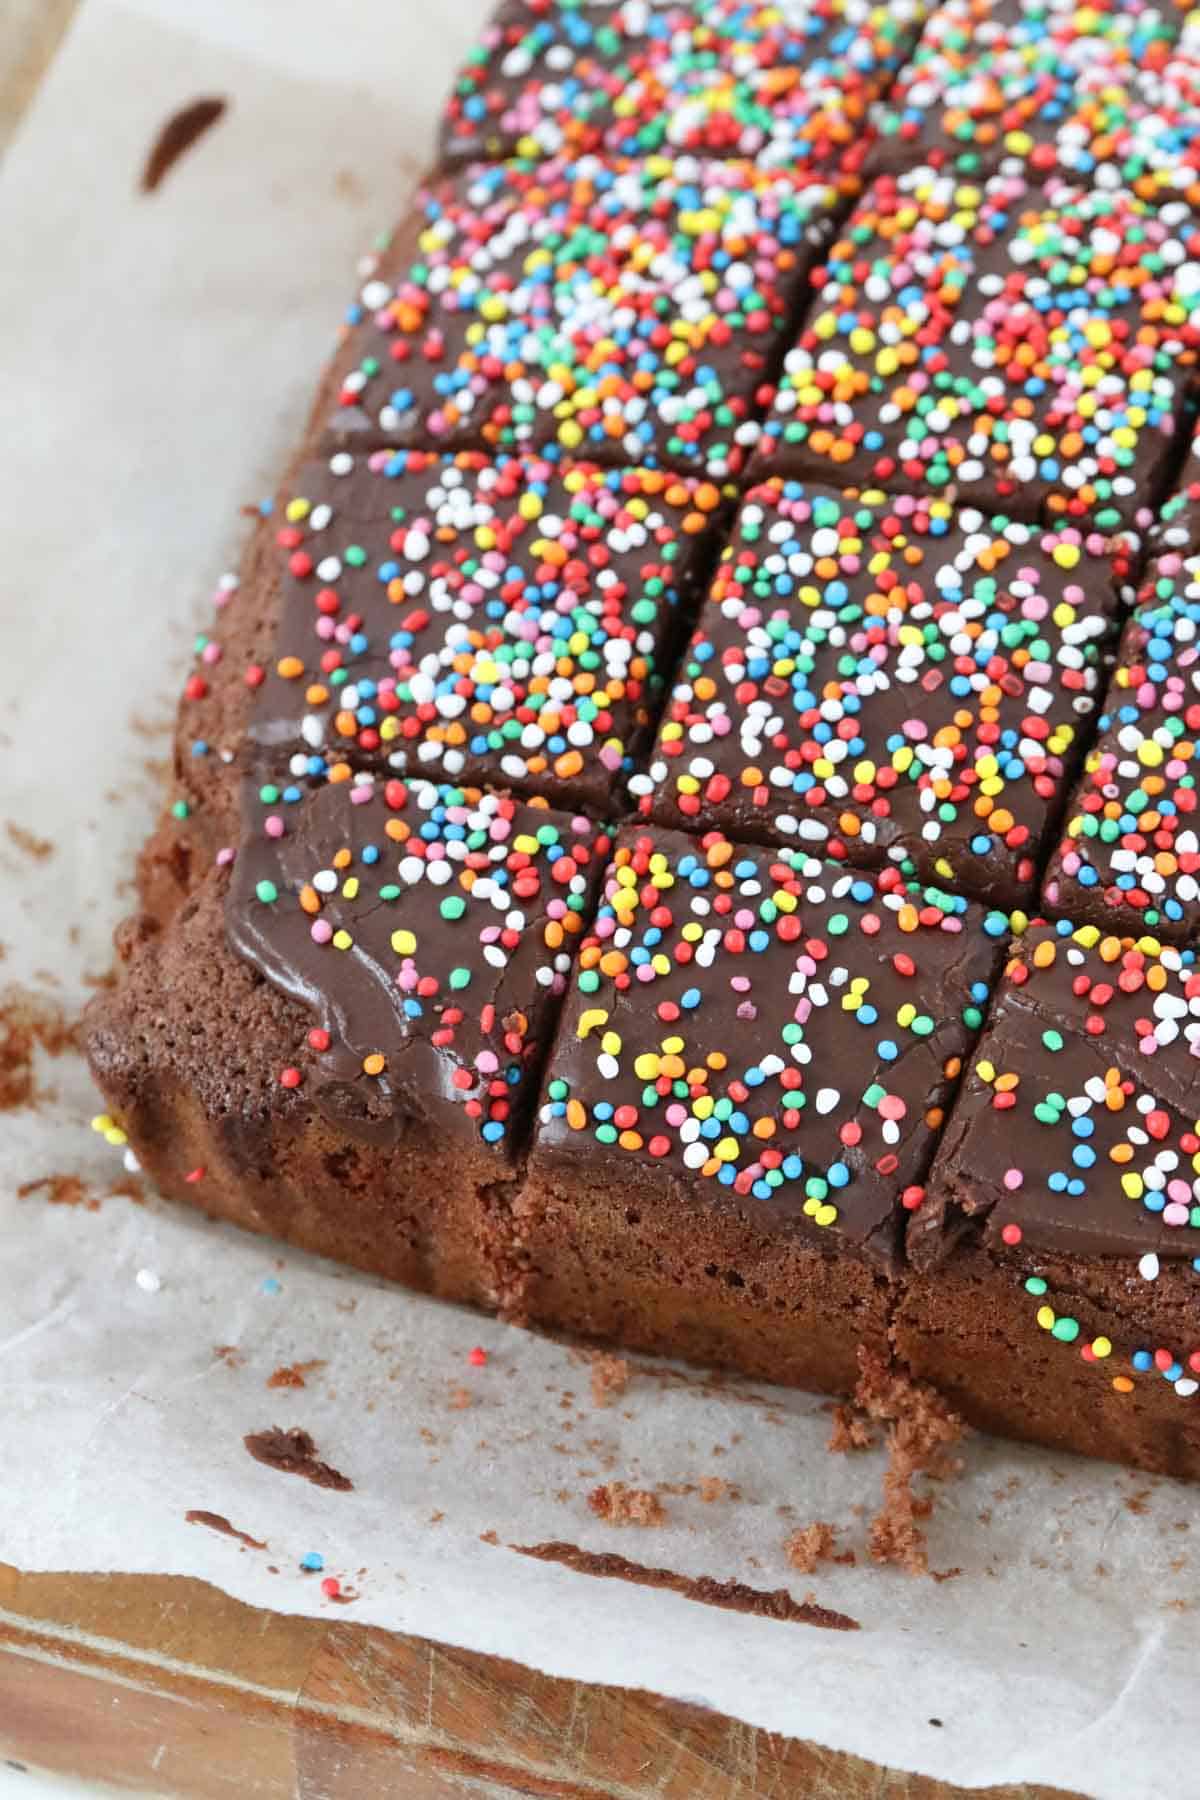 Cut chocolate cake with sprinkles on top, served on a wooden board.